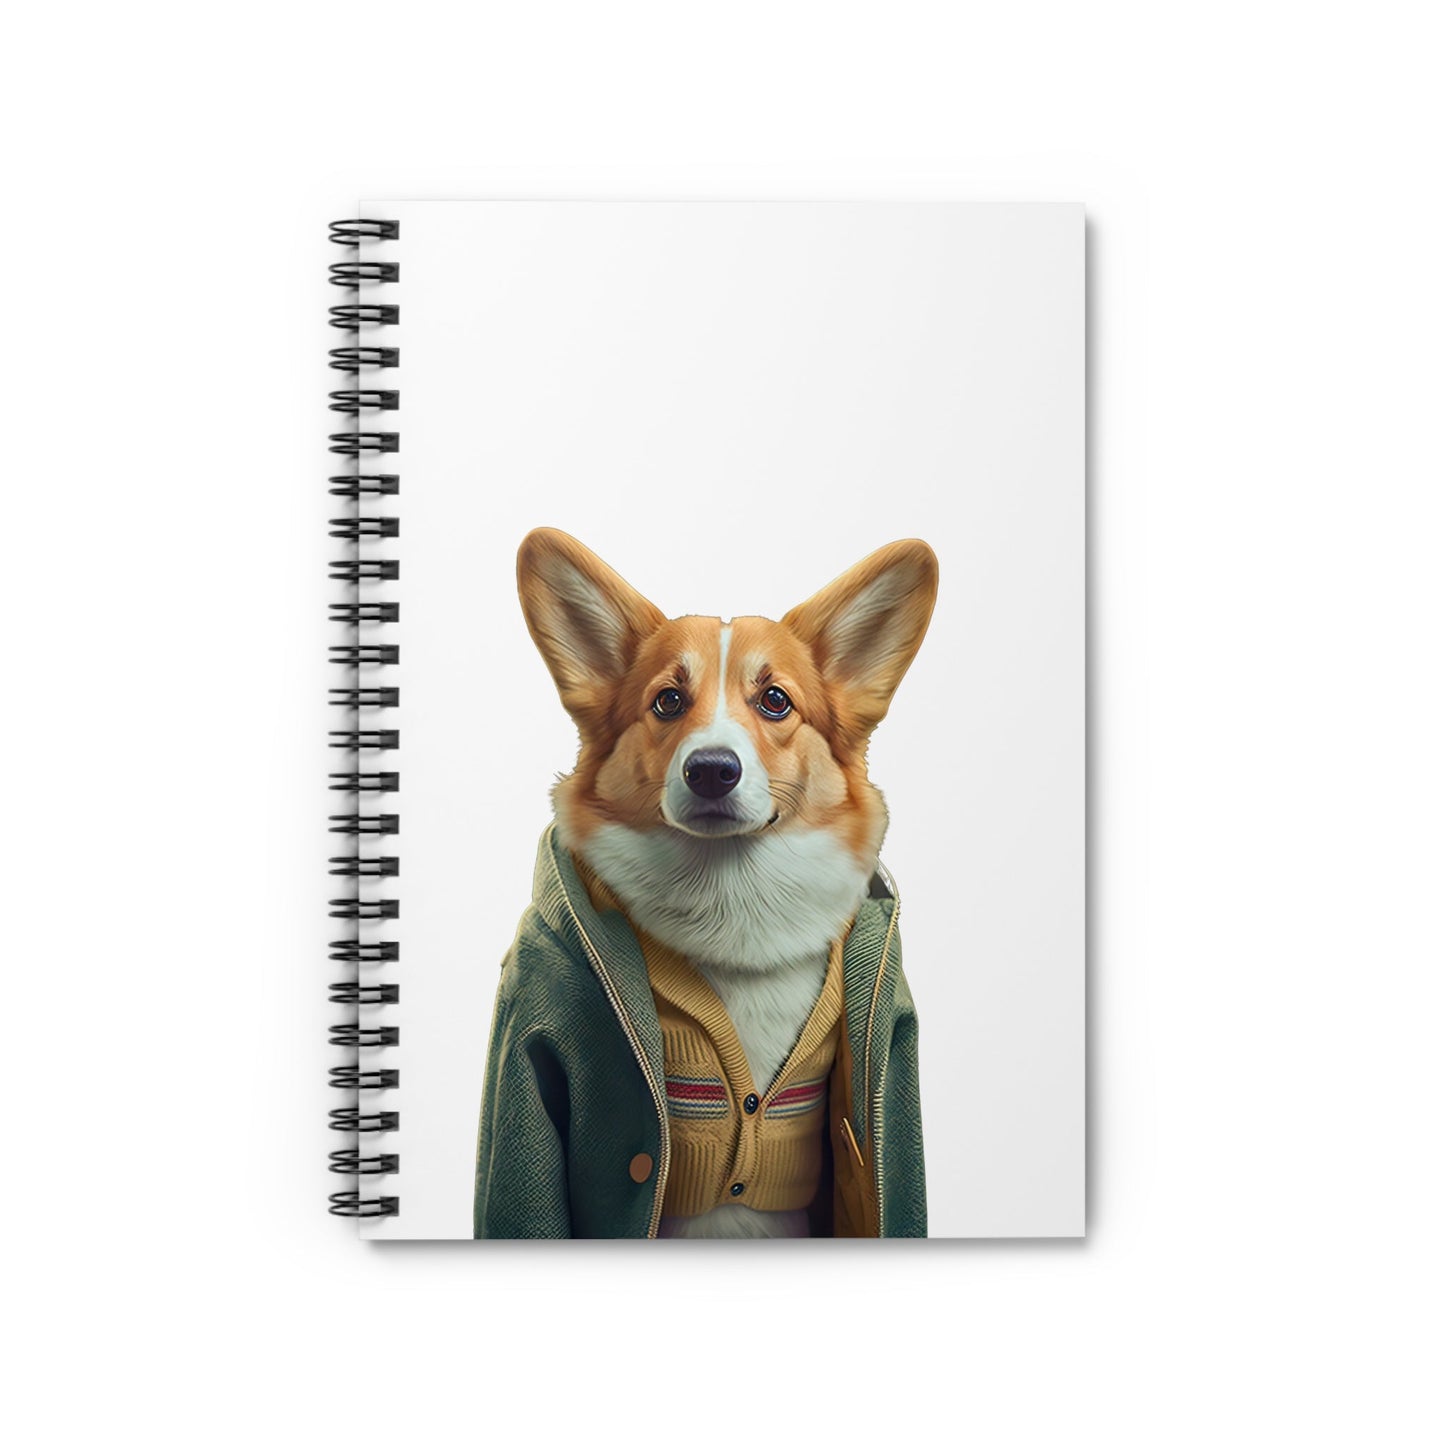 ROBIN : Spiral Notebook - Ruled Line - Shaggy Chic